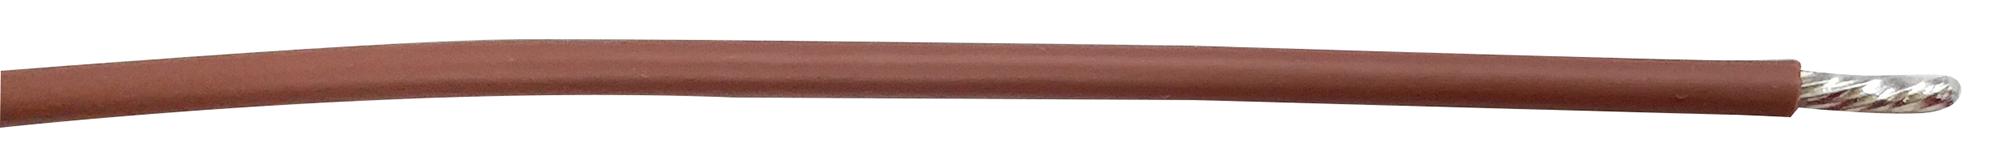 PP002569 CABLE WIRE, 18AWG, BROWN, 305M PRO POWER